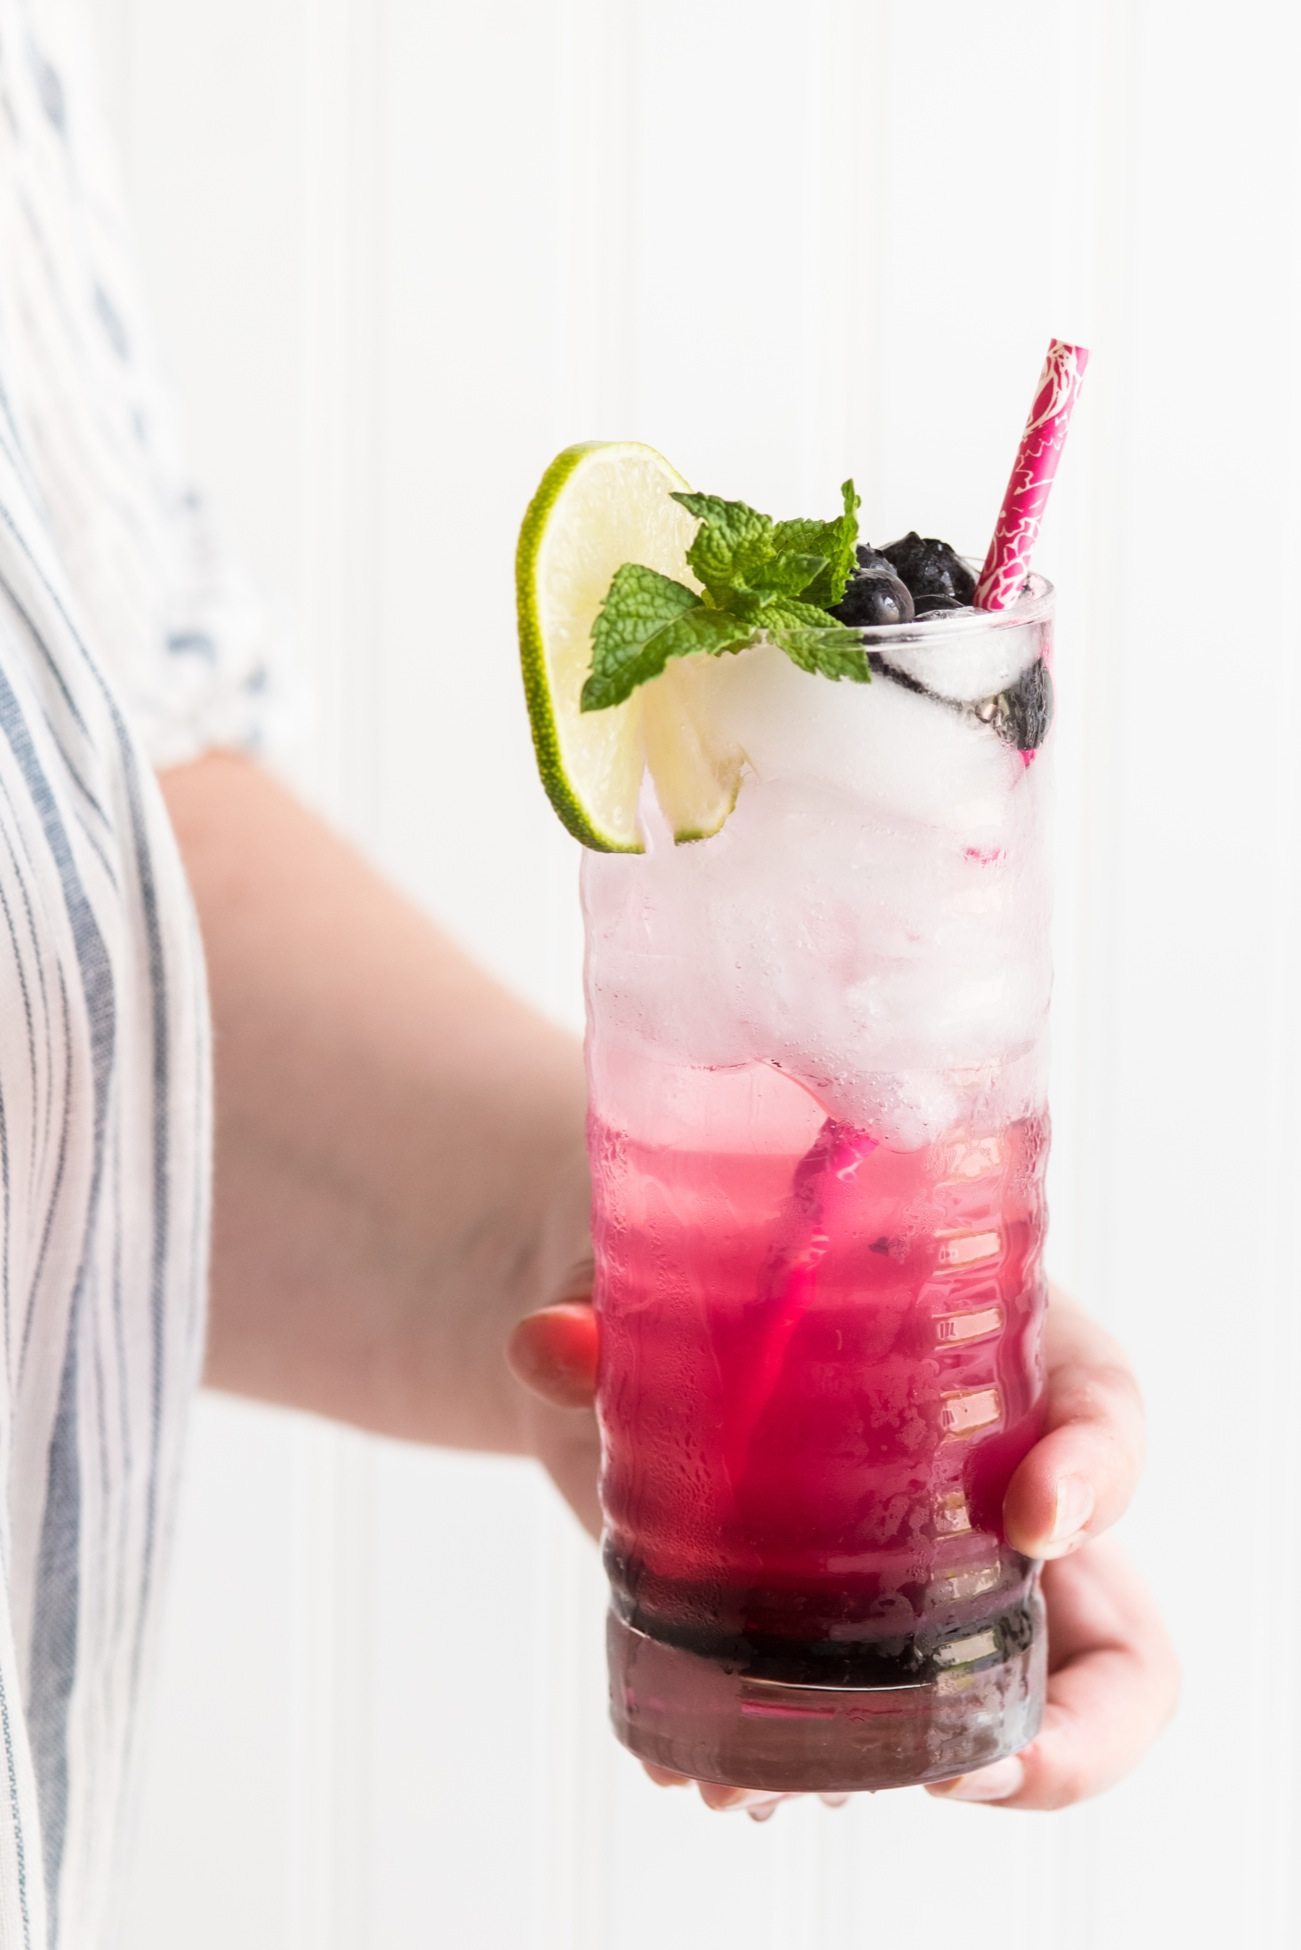 Blueberry Mojito Recipe | Summer cocktail recipes, entertaining tips, party ideas, summer recipes and more from @cydconverse